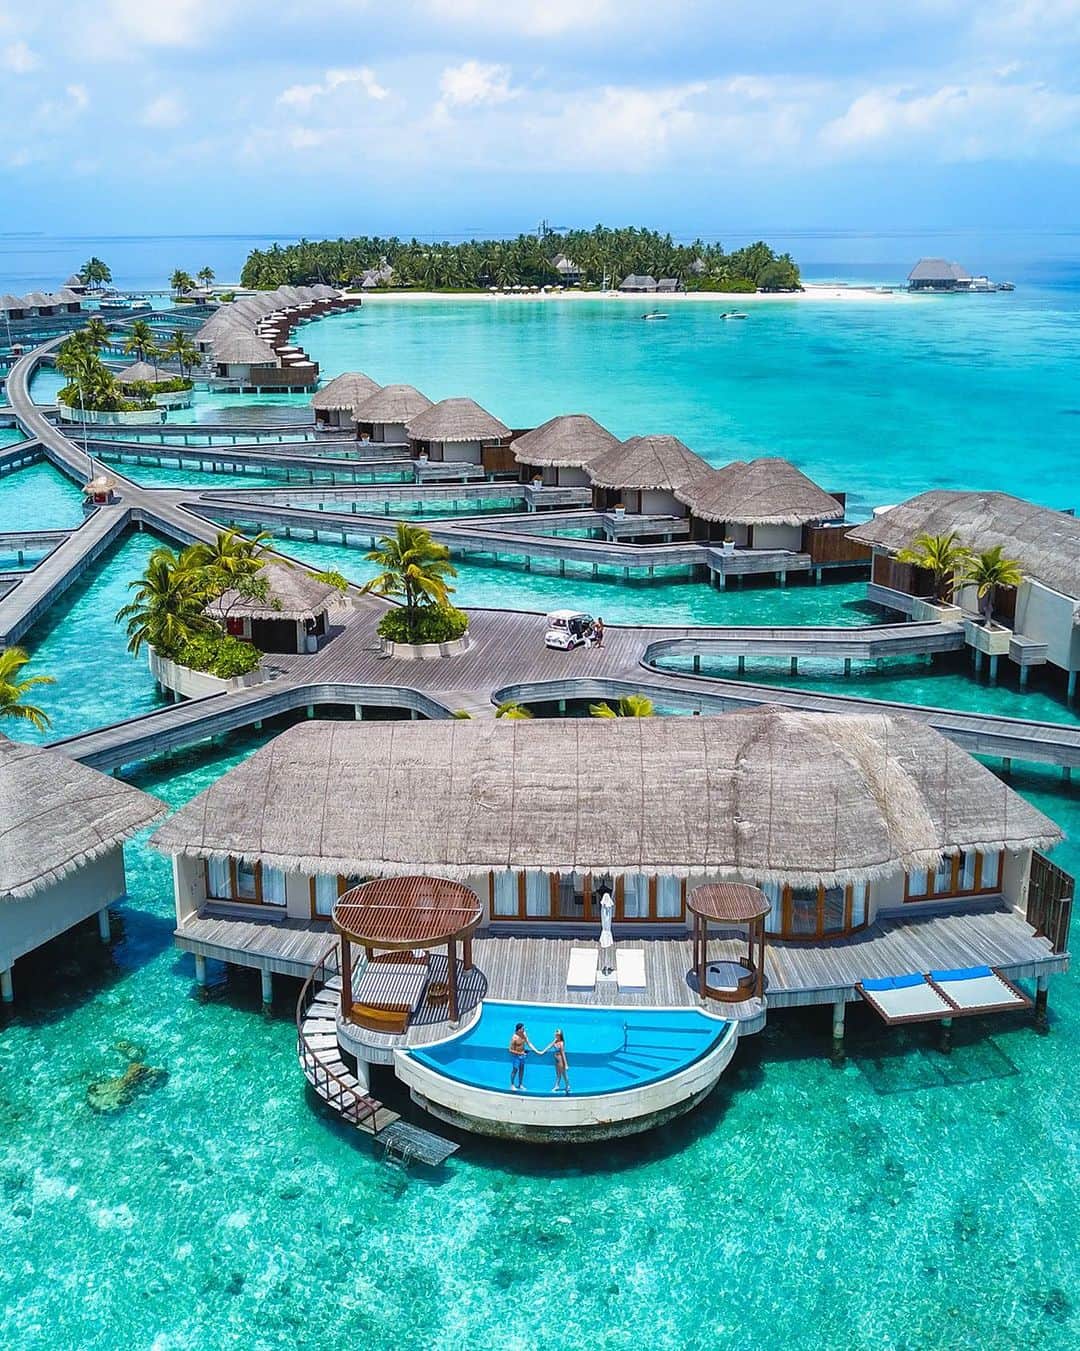 BEAUTIFUL HOTELSのインスタグラム：「@davidauer_ and @lauroria introduce you to the W Maldives! 💦 This tropical paradise offers it all: overwater bungalows, private decks, a stunning spa, vibrant marine life and more! 🌊🧖🏻‍♀️🐠  📽 @davidauer_ @lauroria 📍 @wmaldives, Maldives」